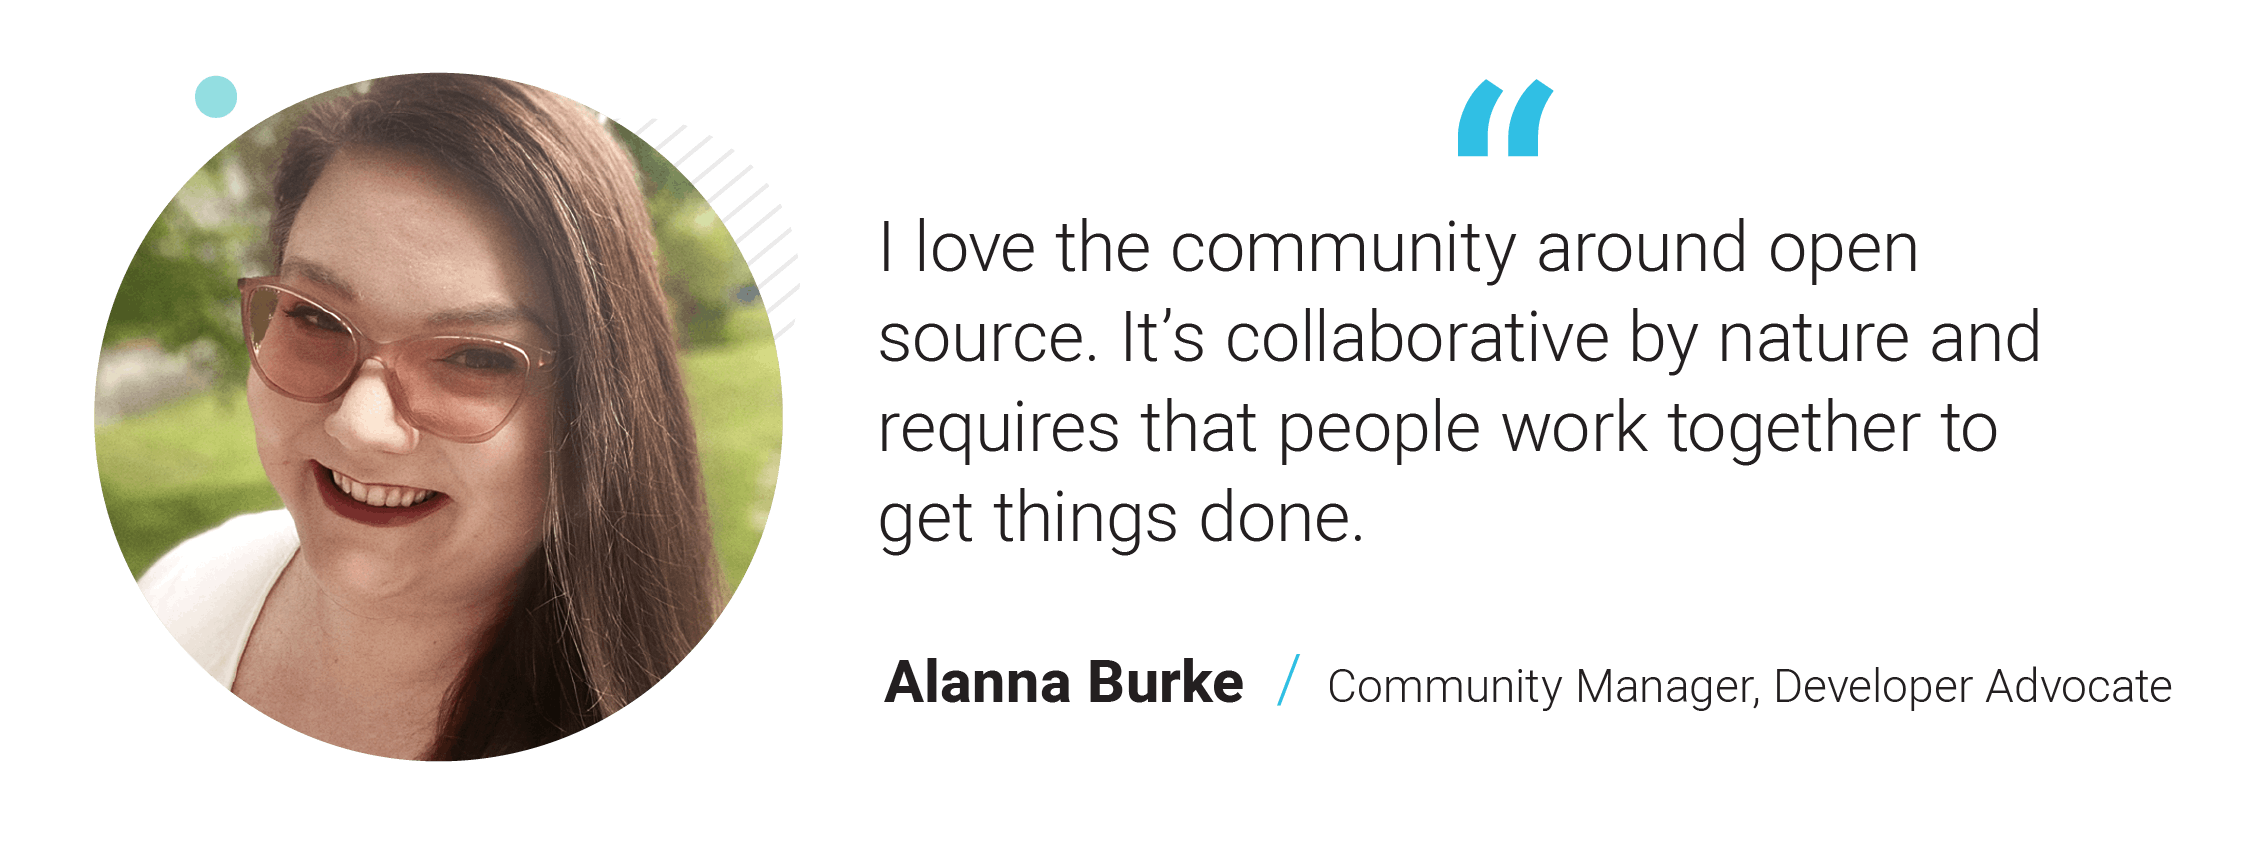 I love the community around open source. It’s collaborative by nature and requires that people work together to get things done. - Alanna Burke, Community Manager, Developer Advocate